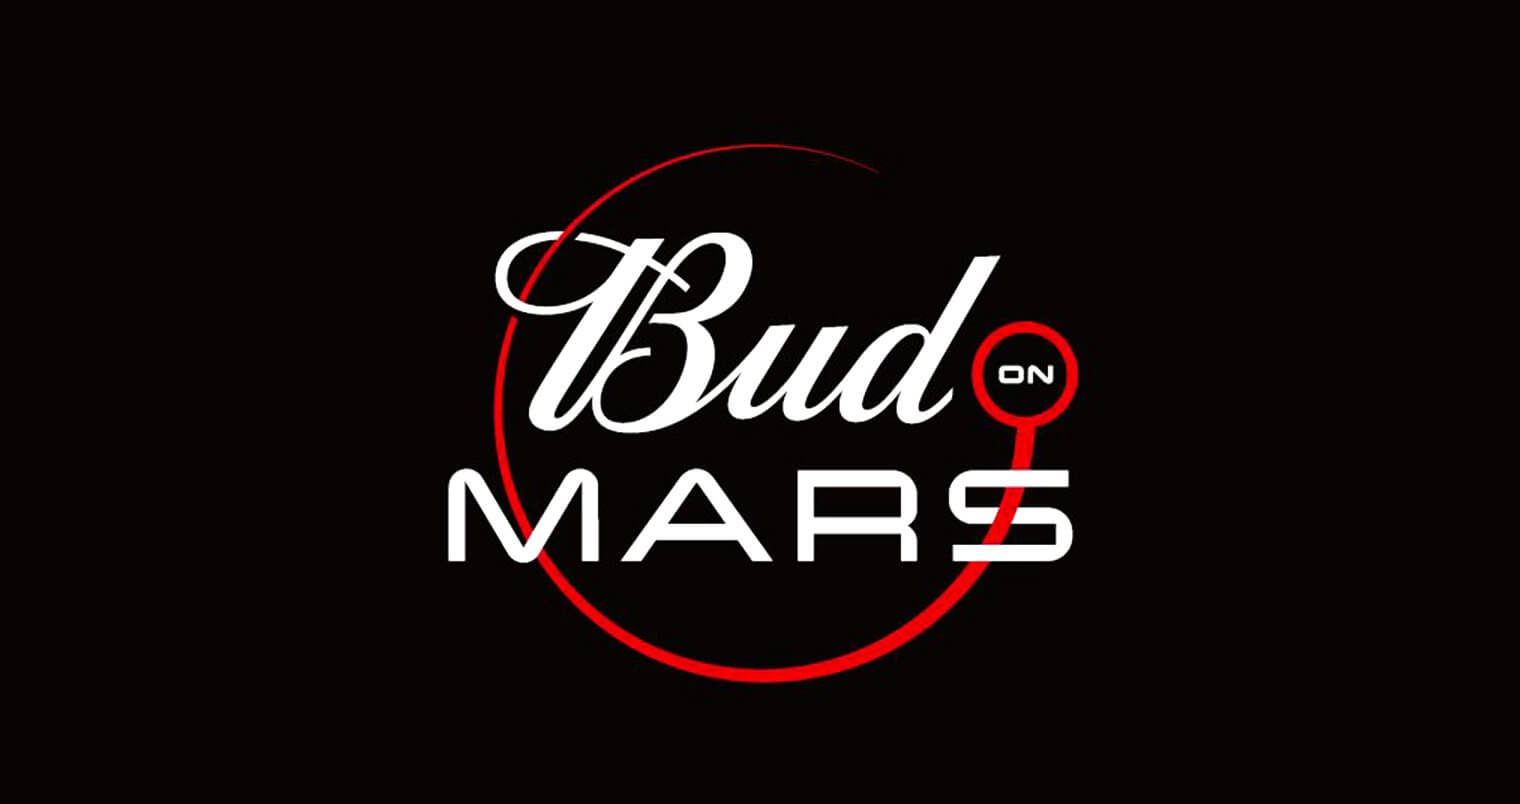 Budweiser First Beer on Mars, logo on black, featured image